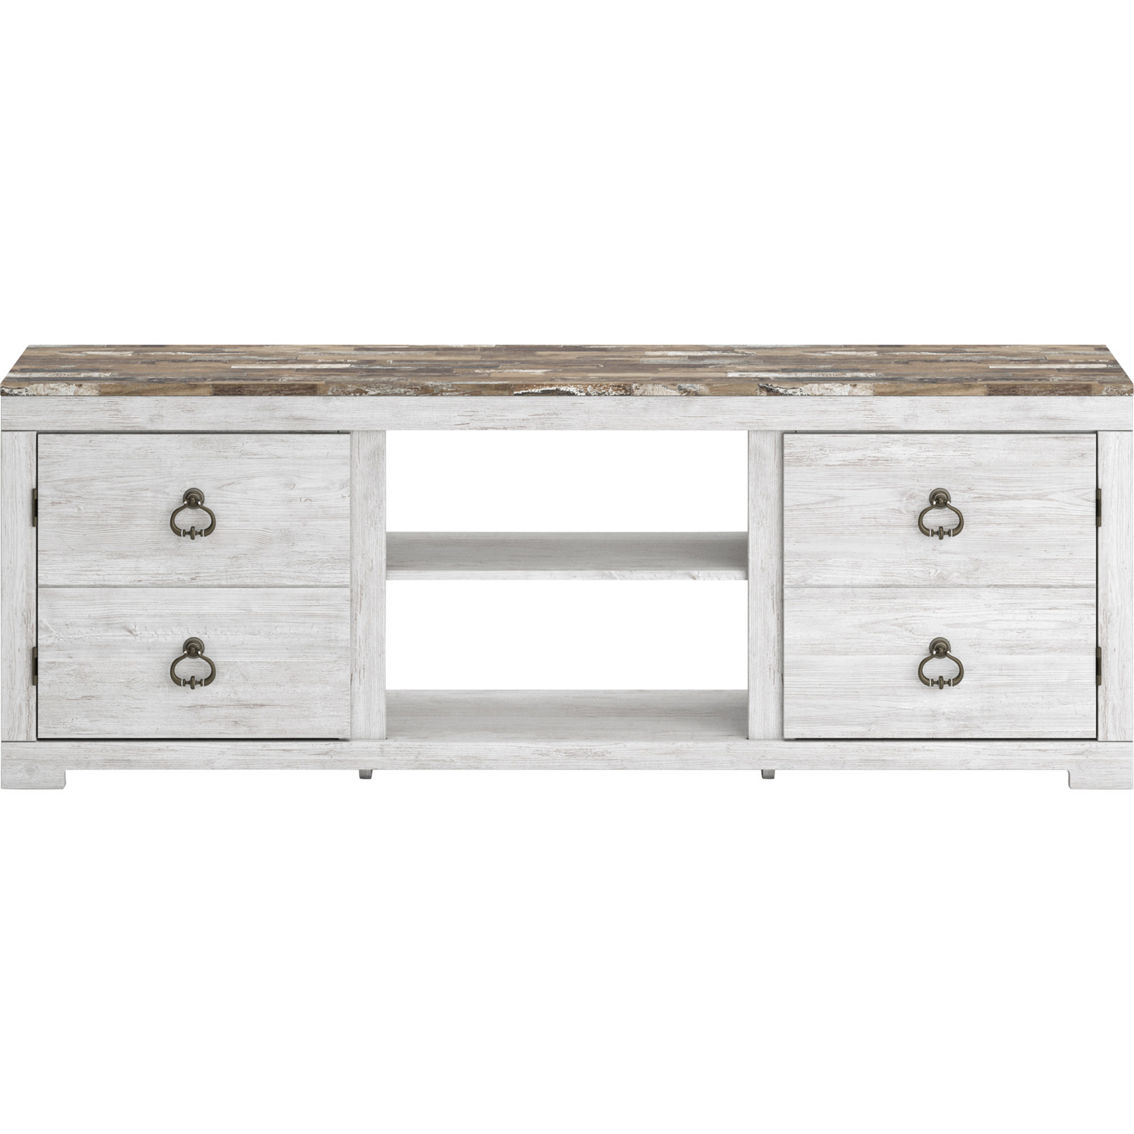 Signature Design by Ashley Willowton Entertainment Center 4 pc. - Image 3 of 5